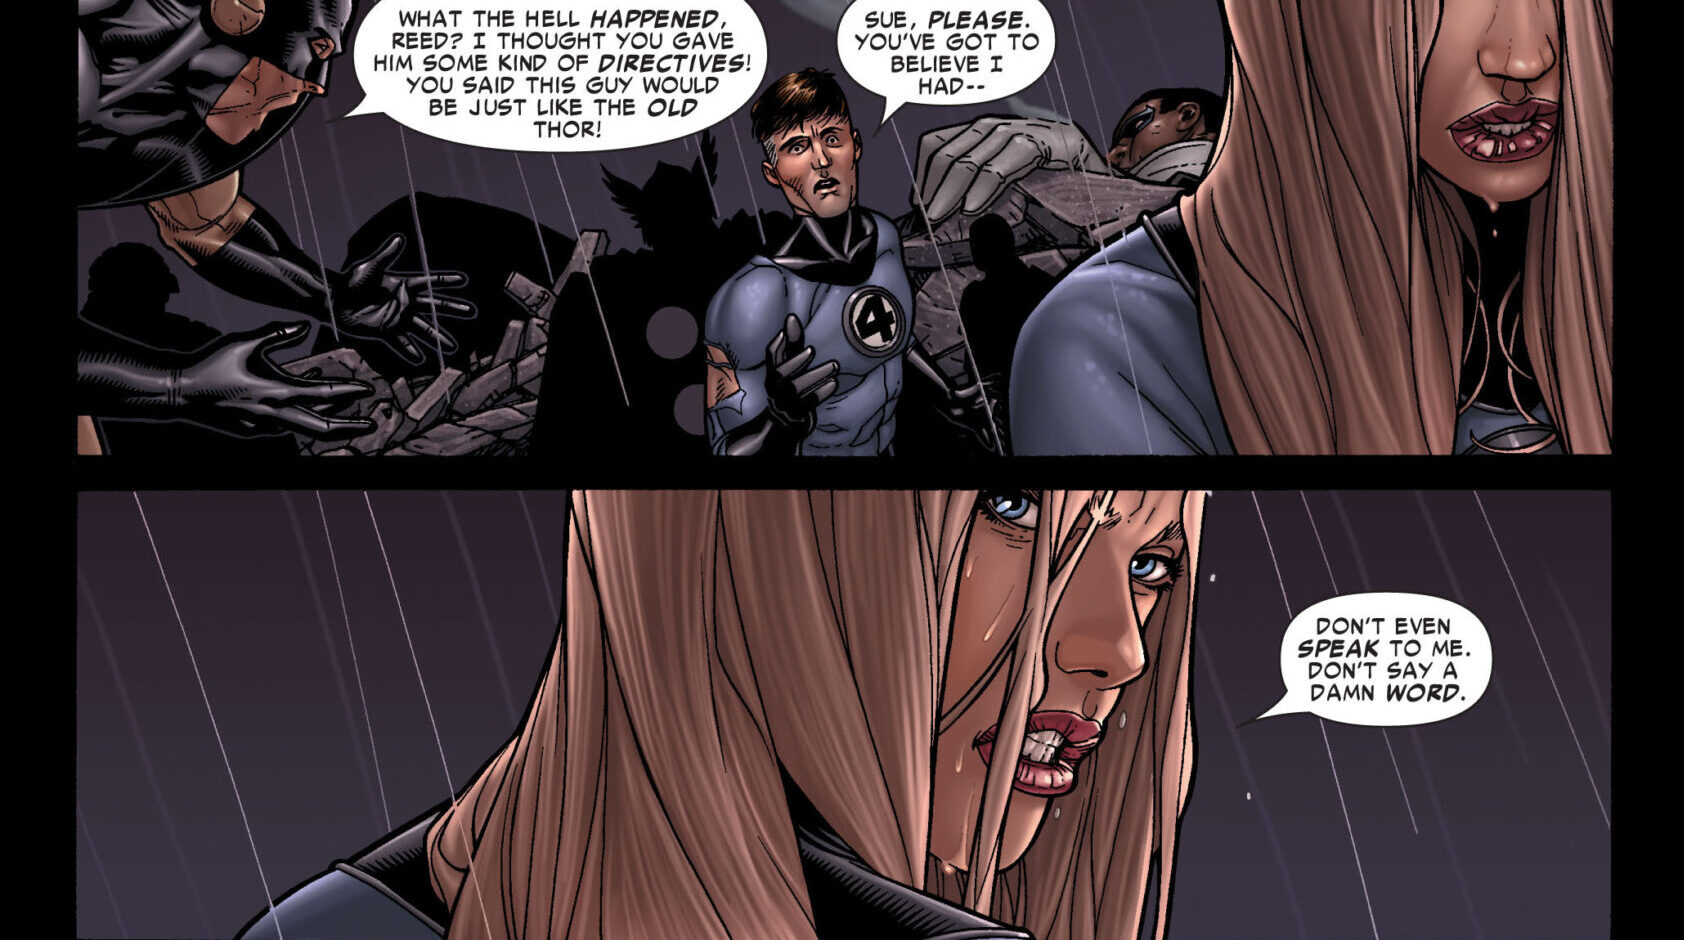 Sue Storm has had enough of Reed Richards' betrayal in Civil War Vol. 1 #4 (2006), Marvel Comics. Words by Mark Millar, art by Steve McNiven, Dexter Vines, Morry Hollowell, and Chris Eliopoulous.